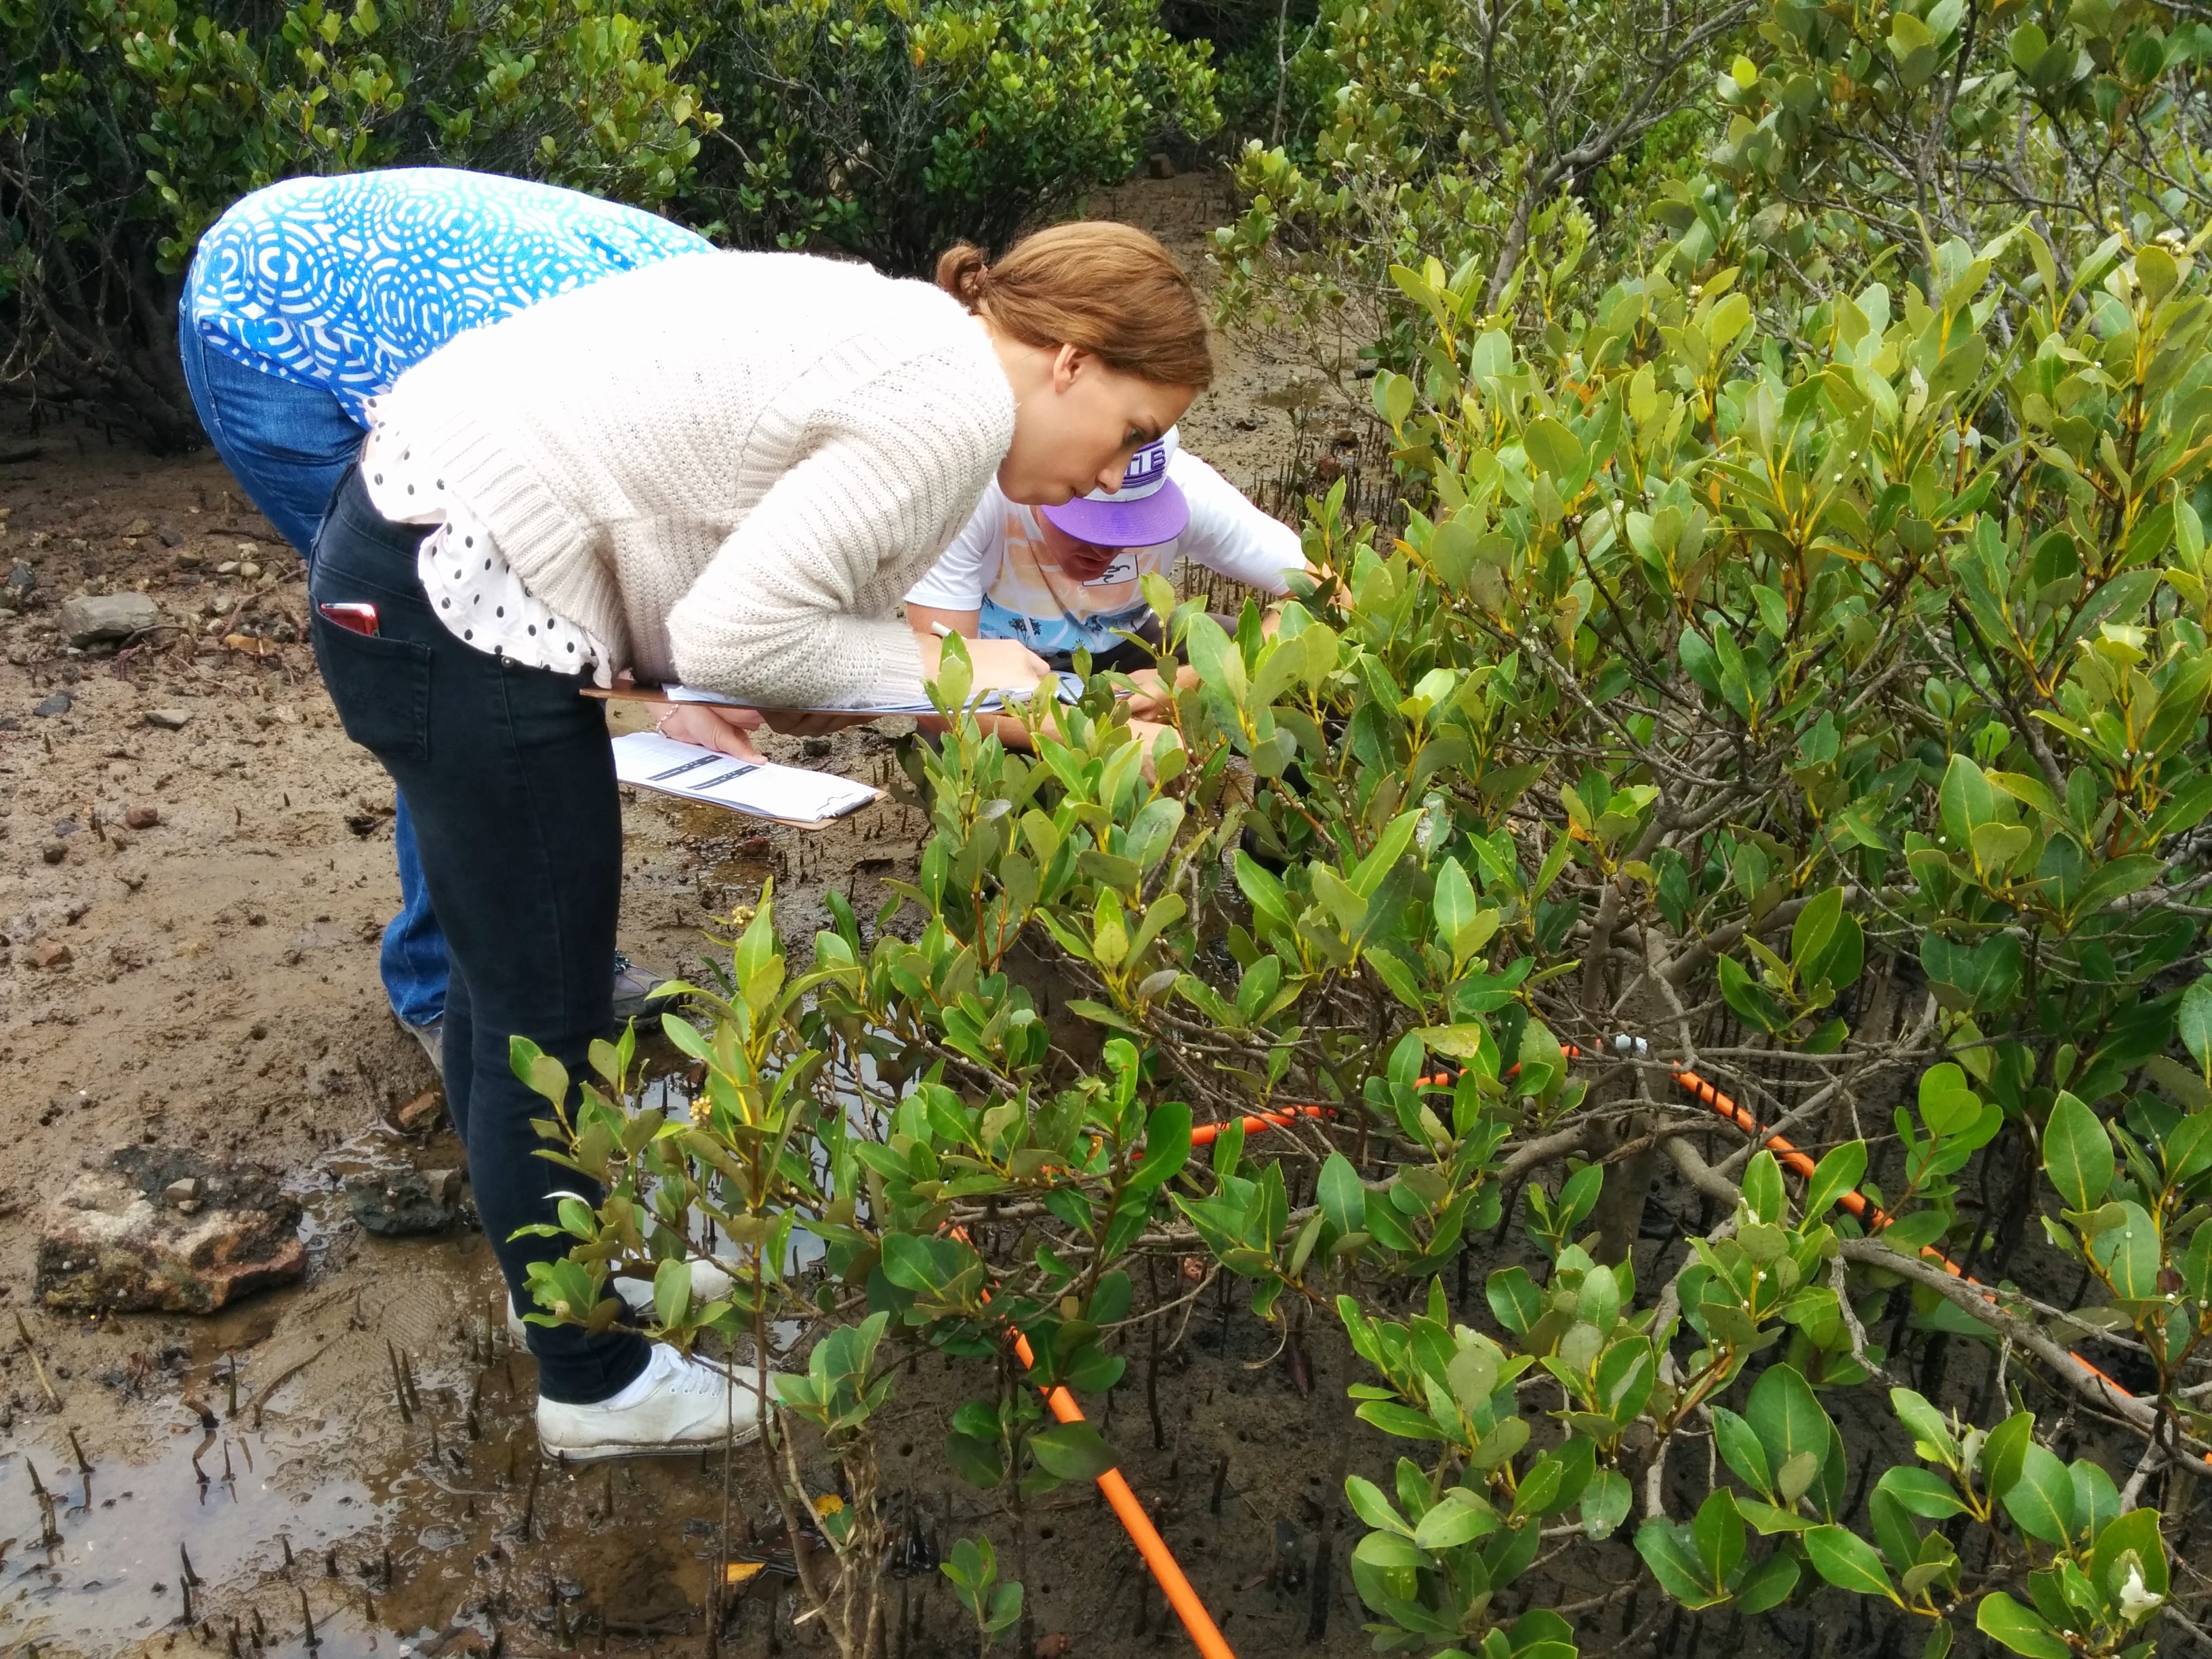 Students leaning over to closely examine a mangrove plant.